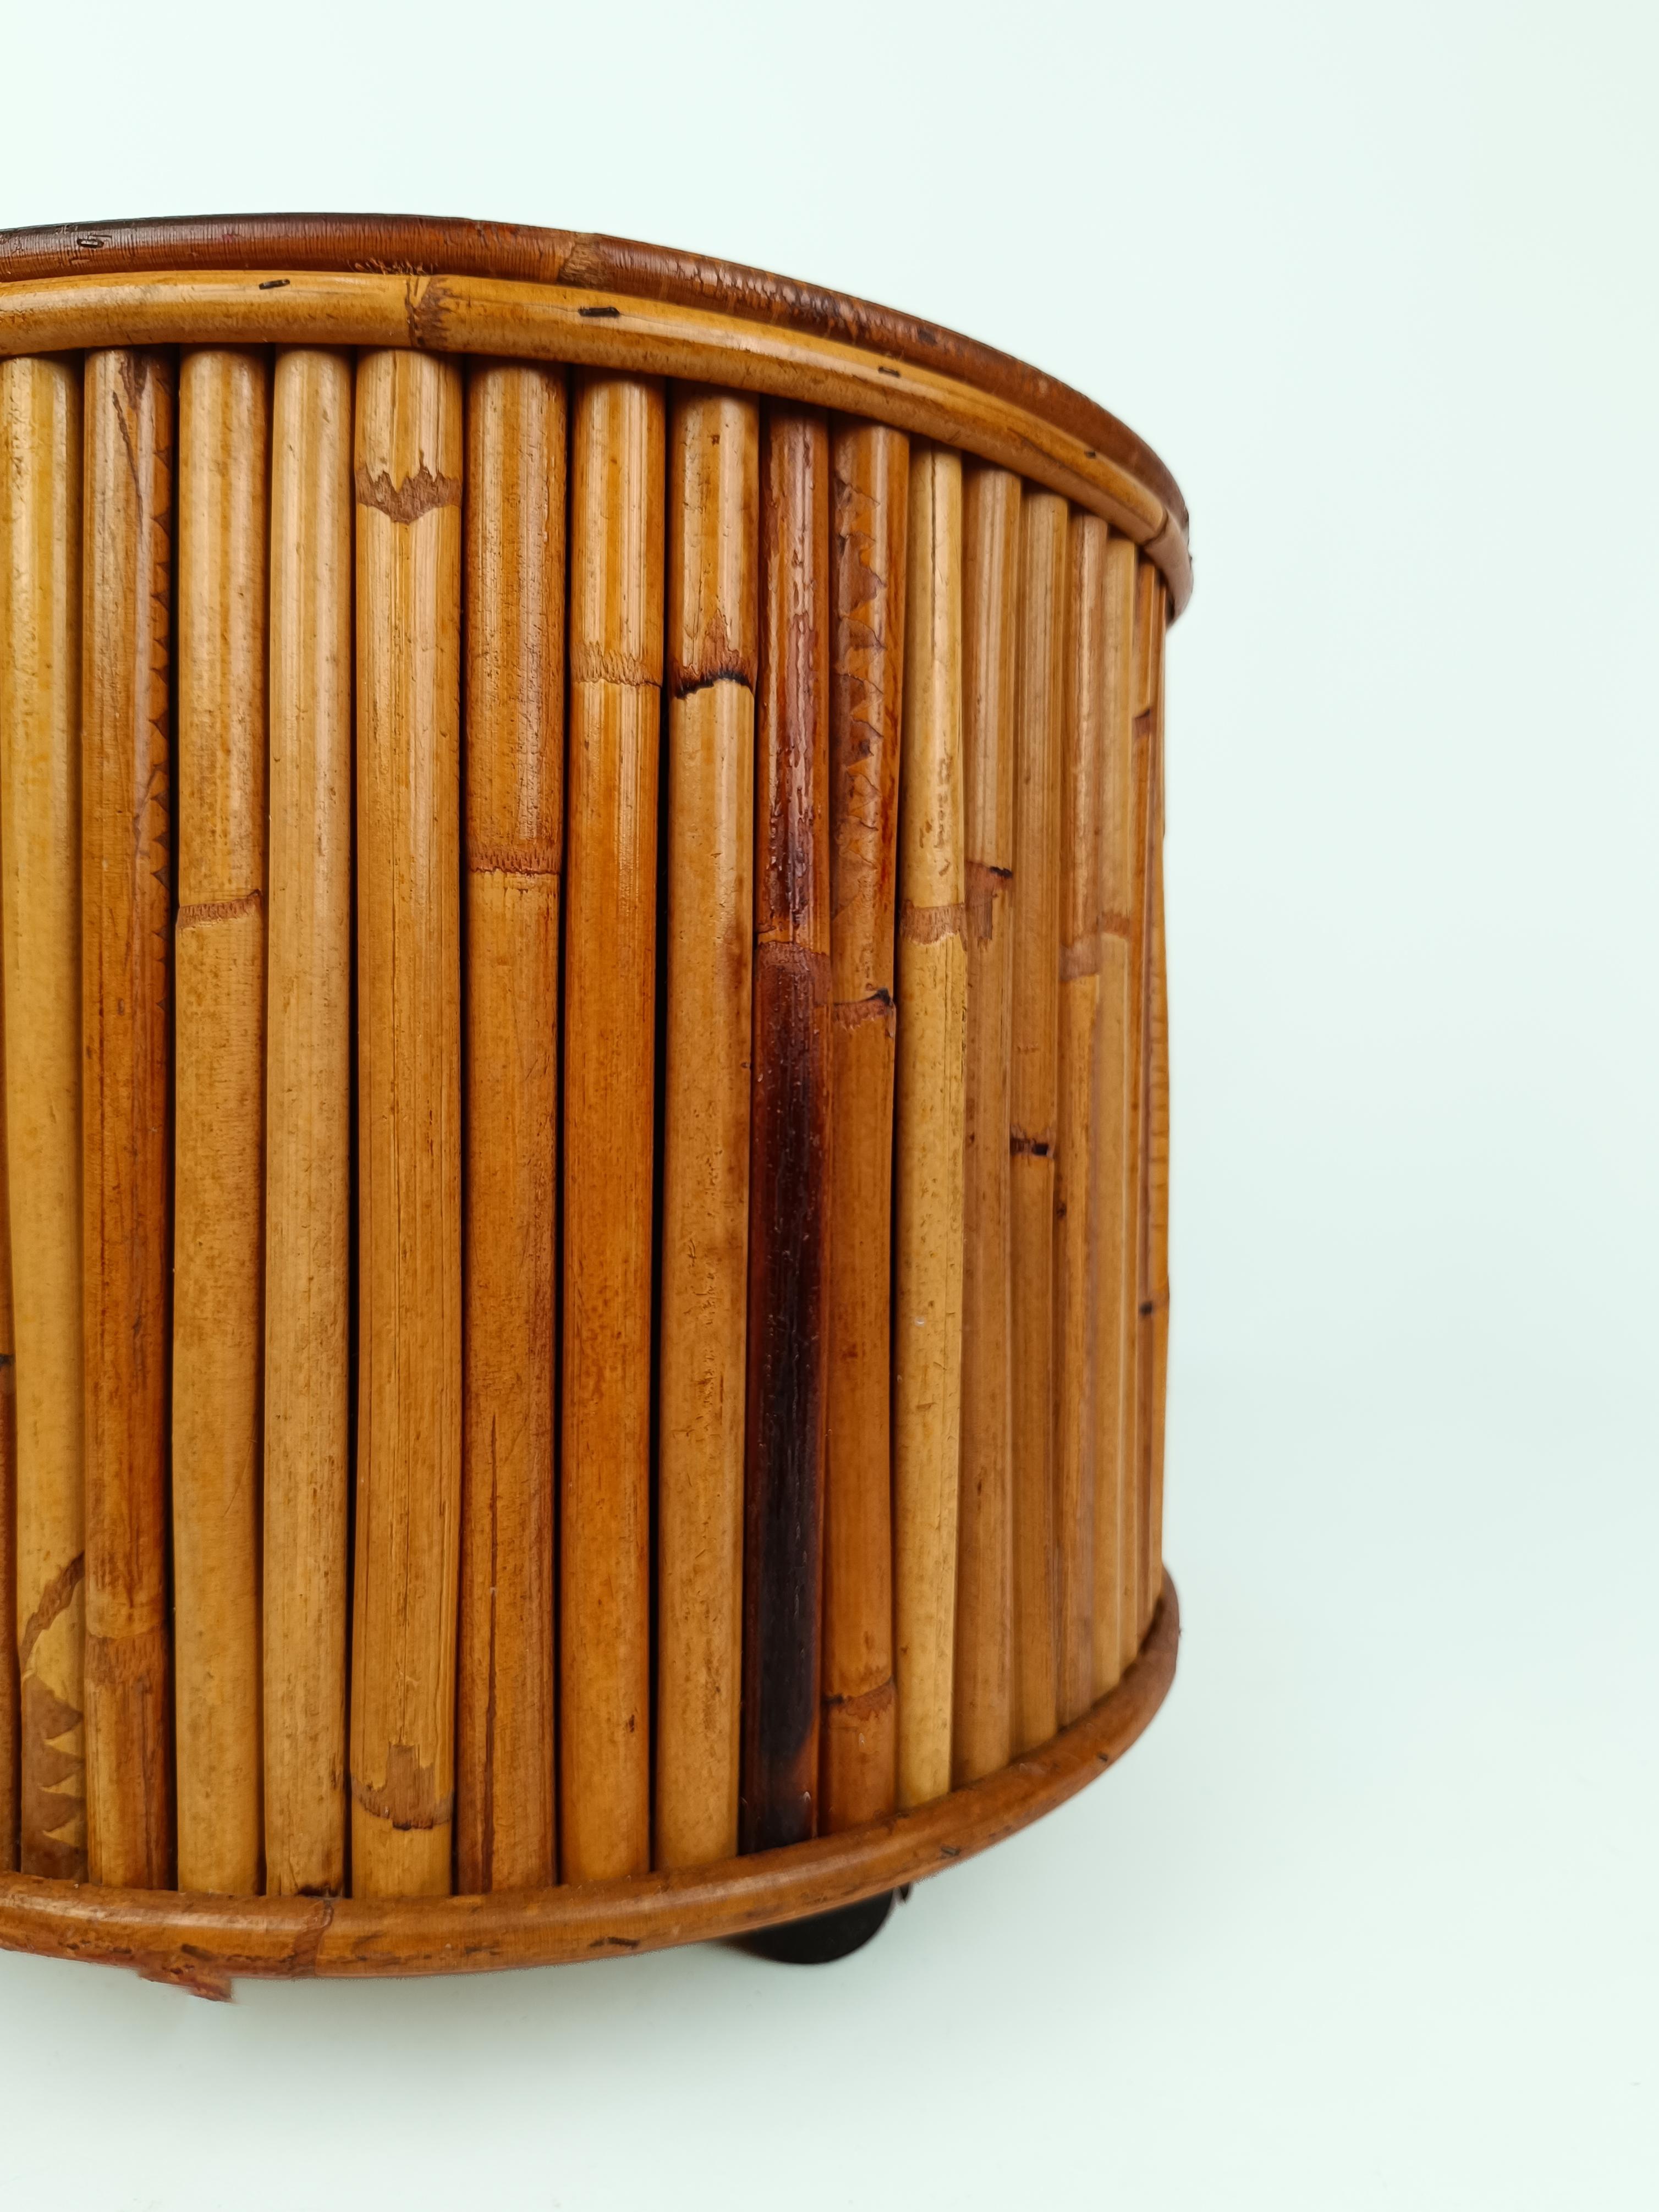 A large vintage cachepot of 40cm diameter, produced in Italy between the 60s and 70s.
Perfect for Boho Chic or Riviera style interiors, with its handmade covering of sections of bamboo canes joined together by bent rush circles.
the bamboo covering